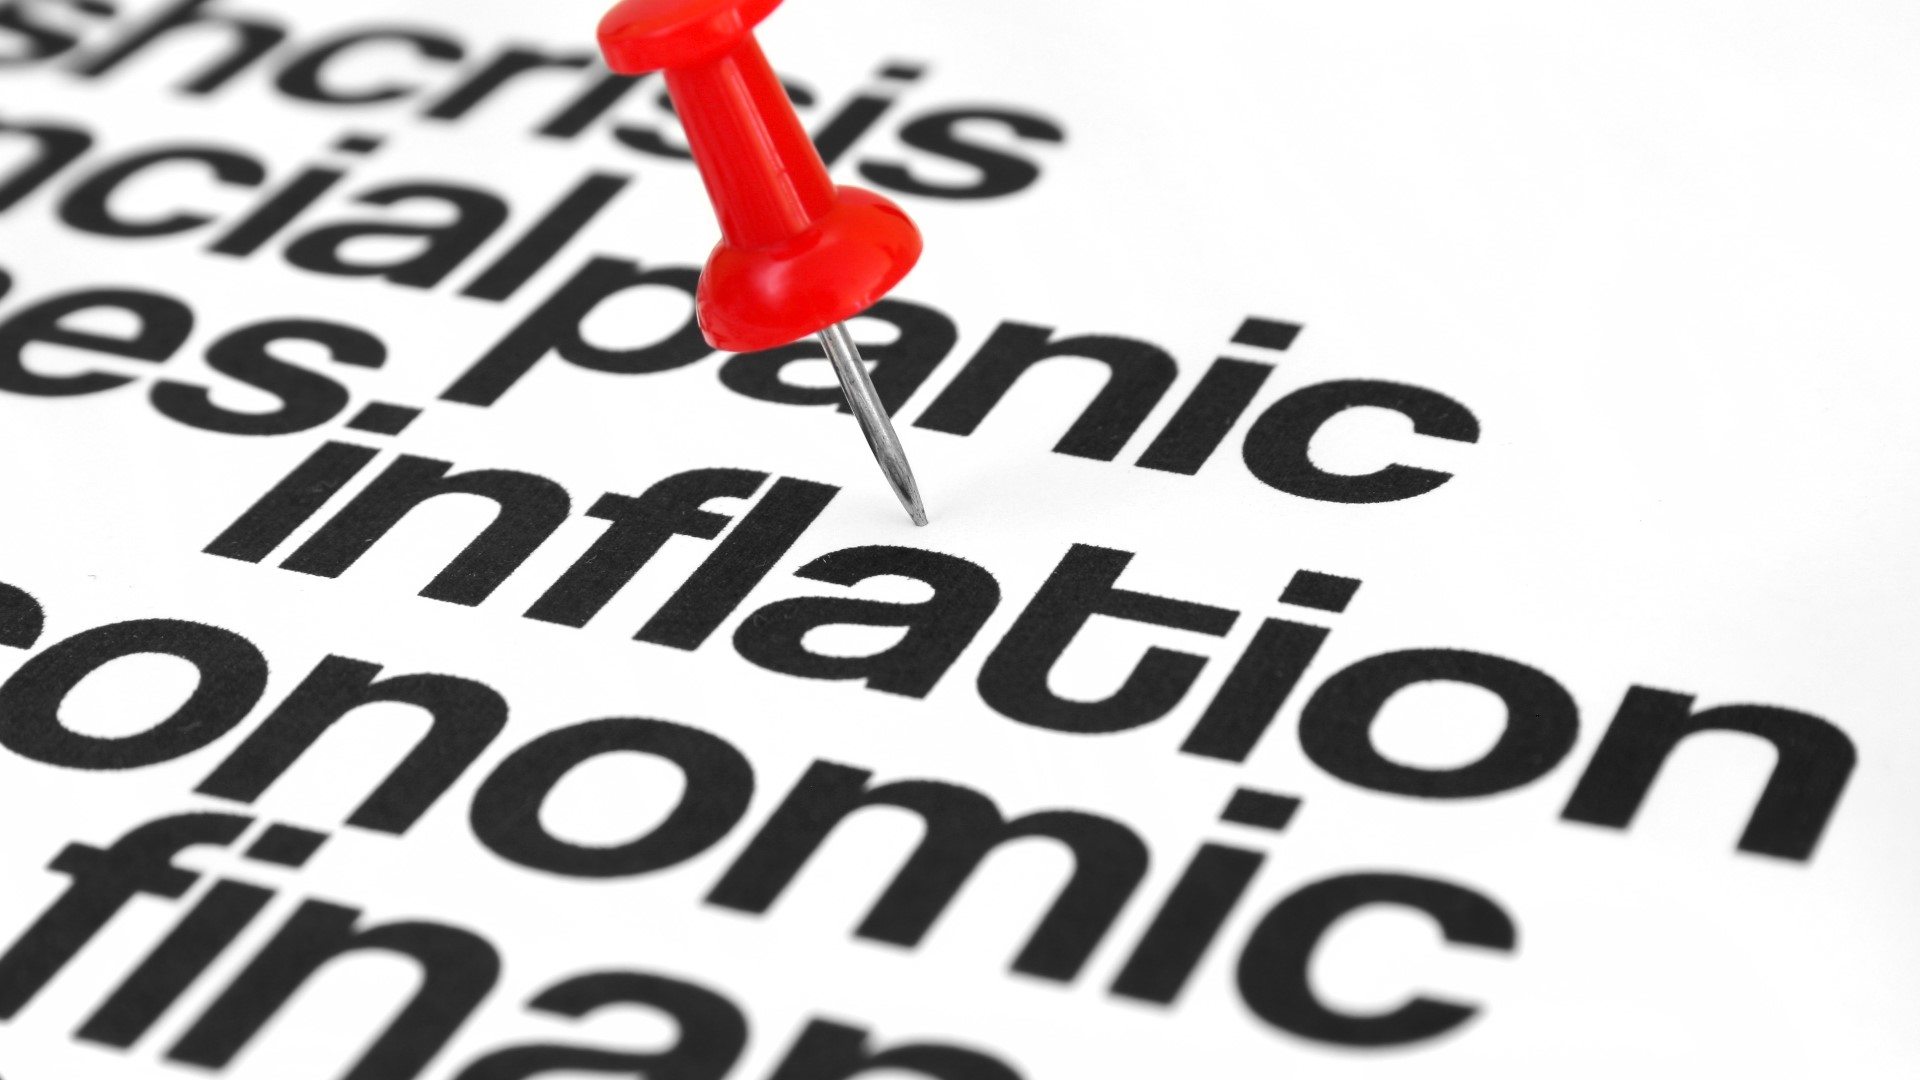 Inflation coming out of the pandemic has been very noticeable in 2021, and the numbers in June and July reflect that.